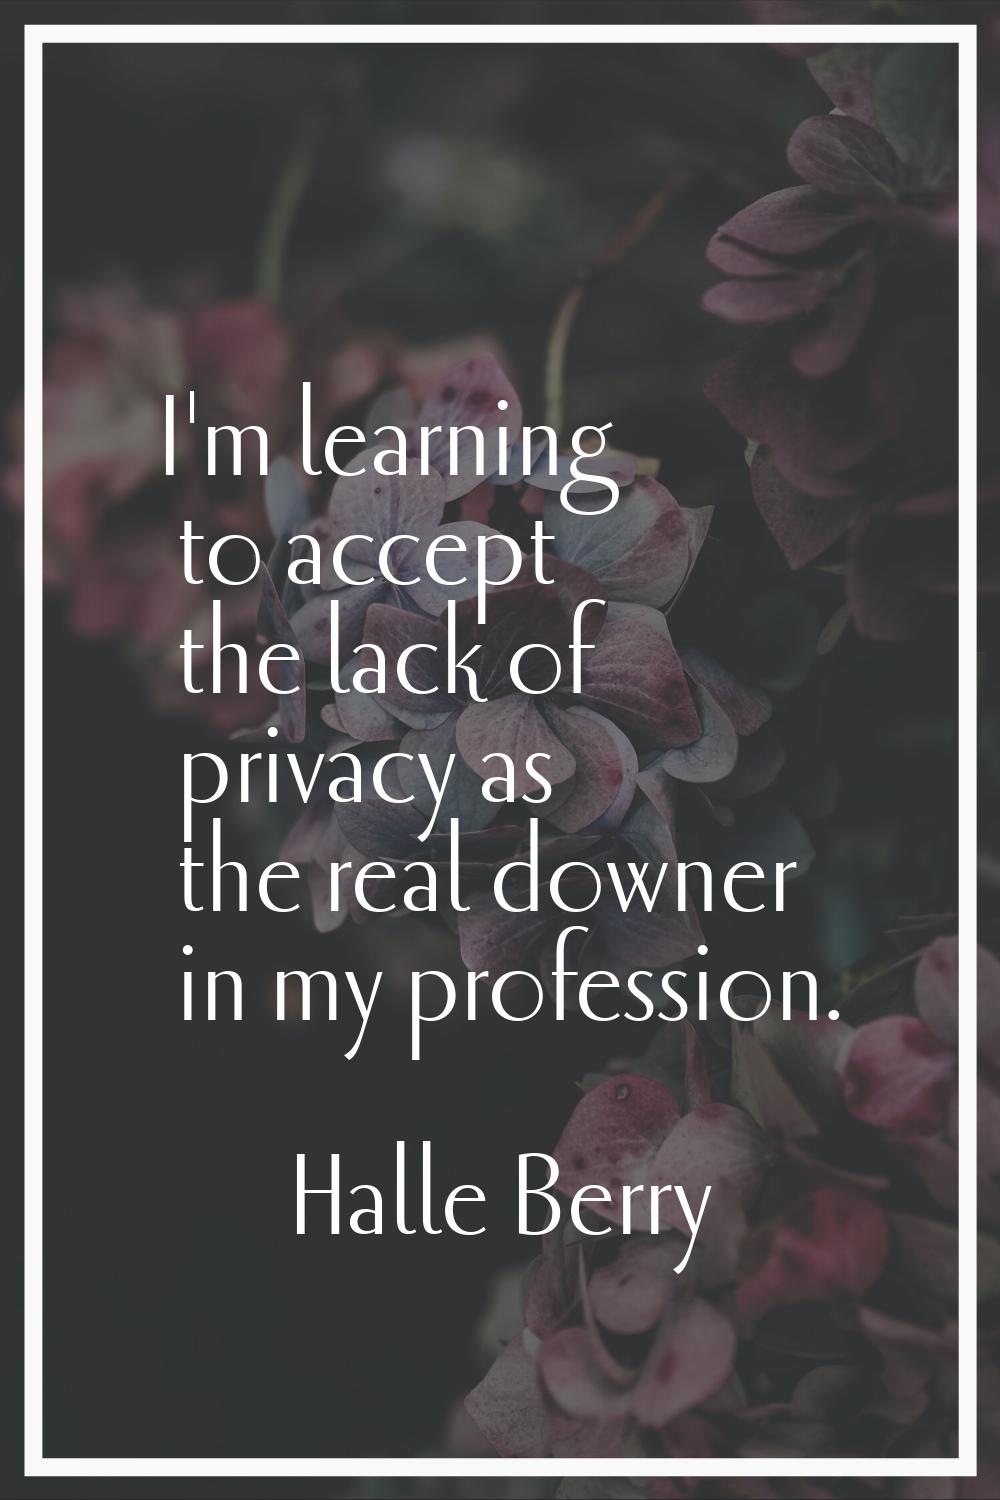 I'm learning to accept the lack of privacy as the real downer in my profession.